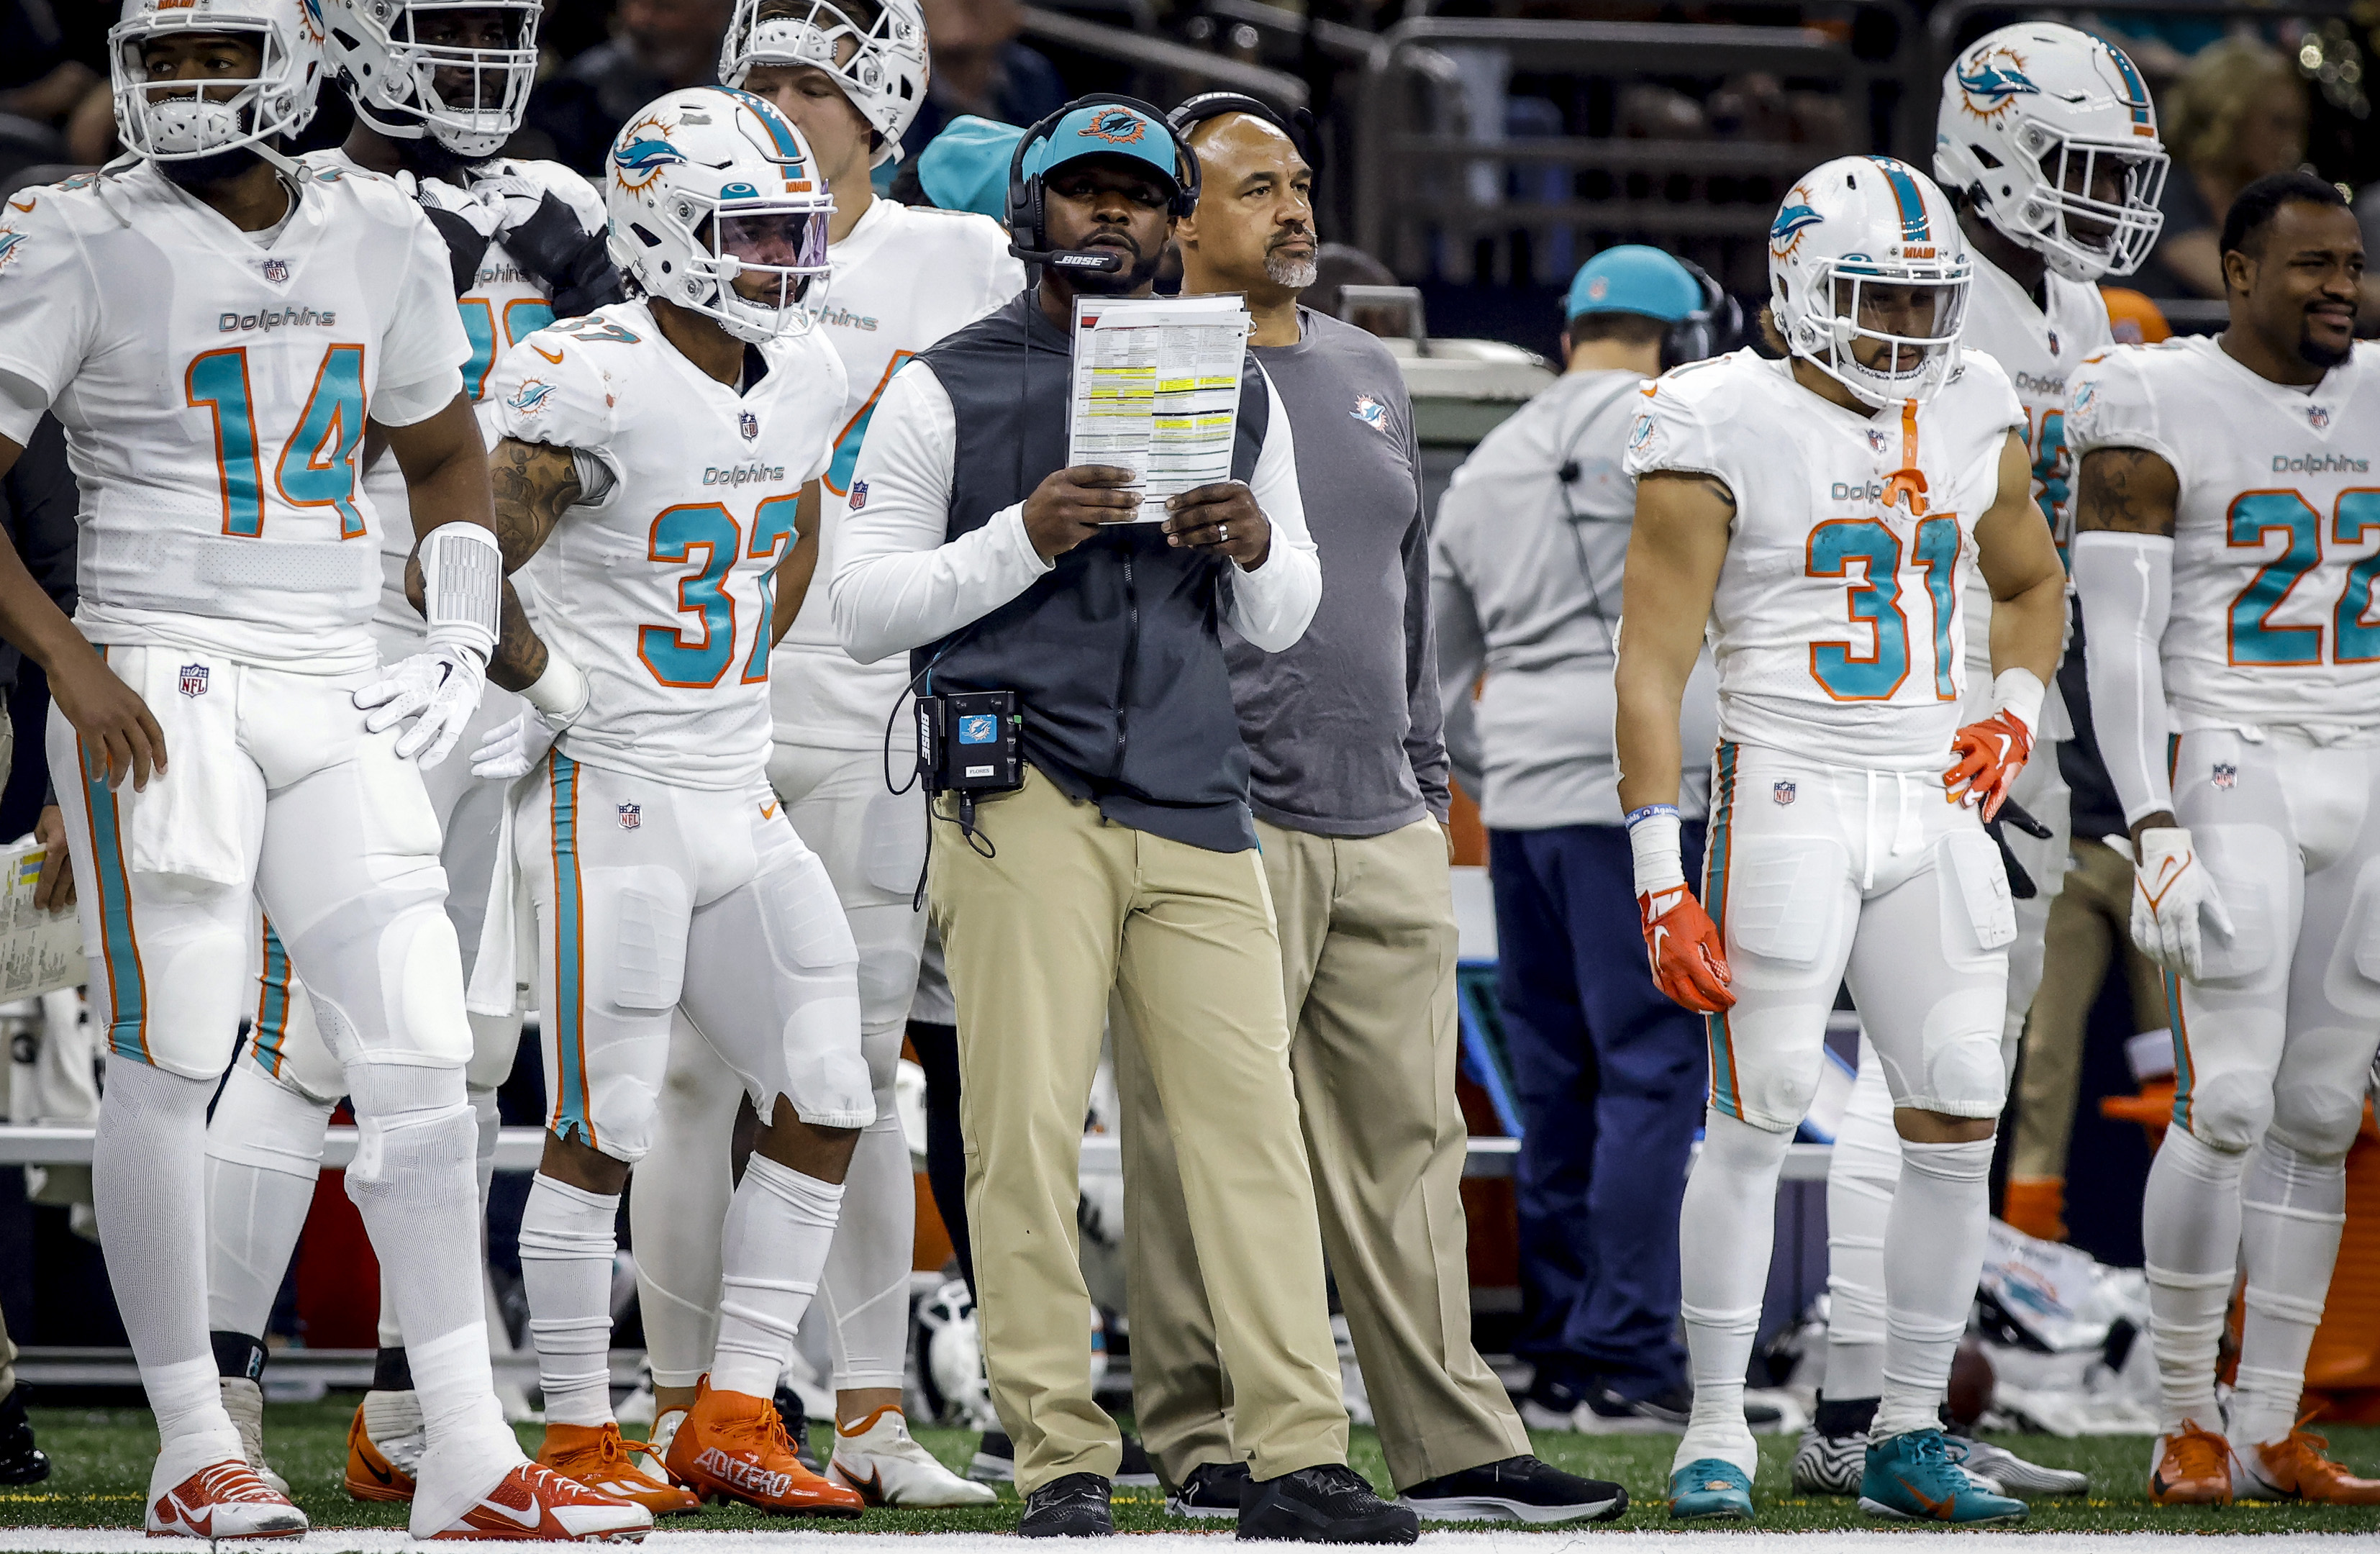 Fired Dolphins coach sues, alleges racist hiring